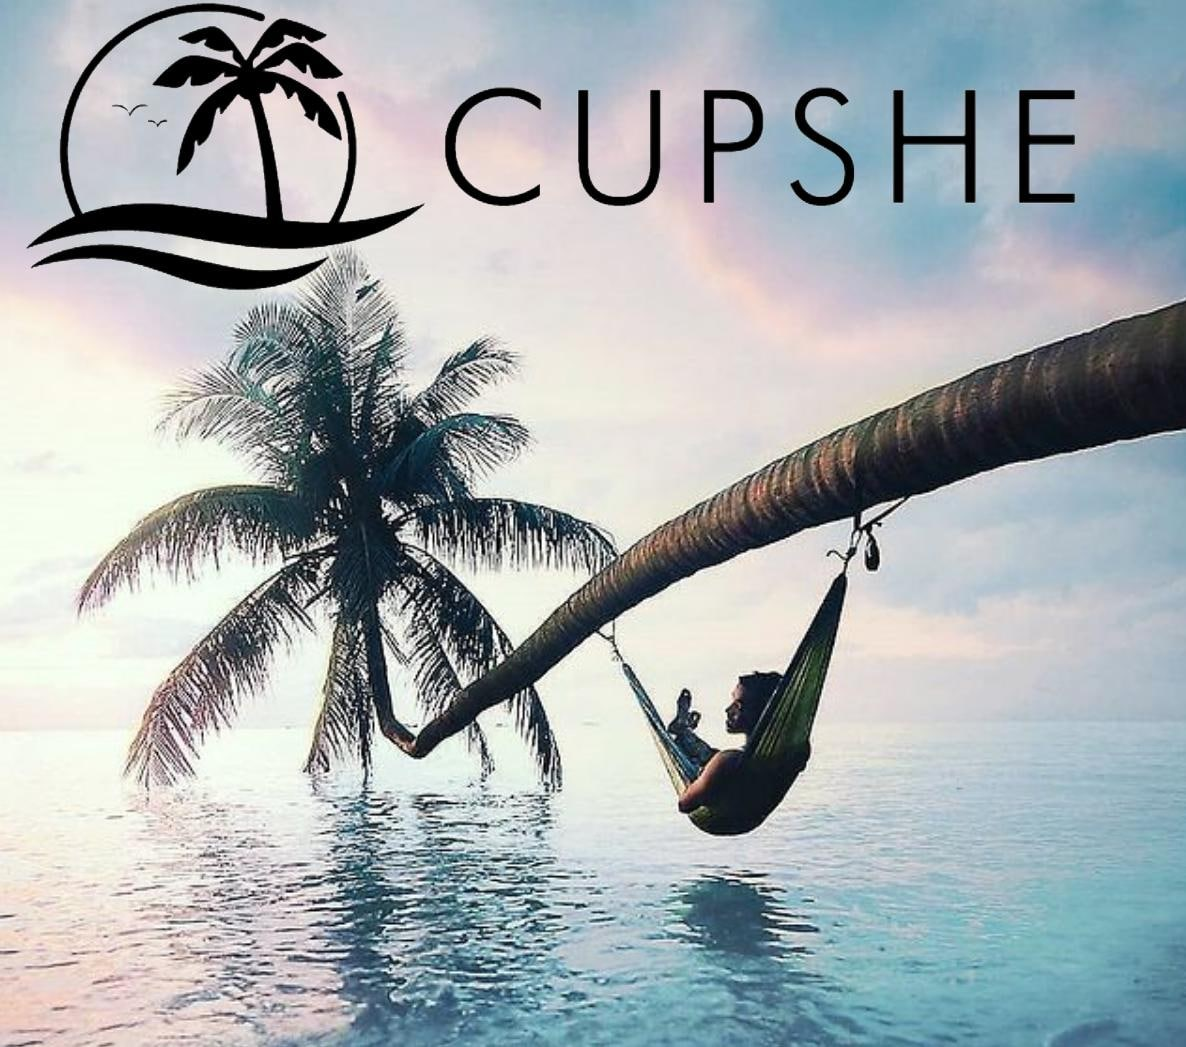 Is cupshe ethical